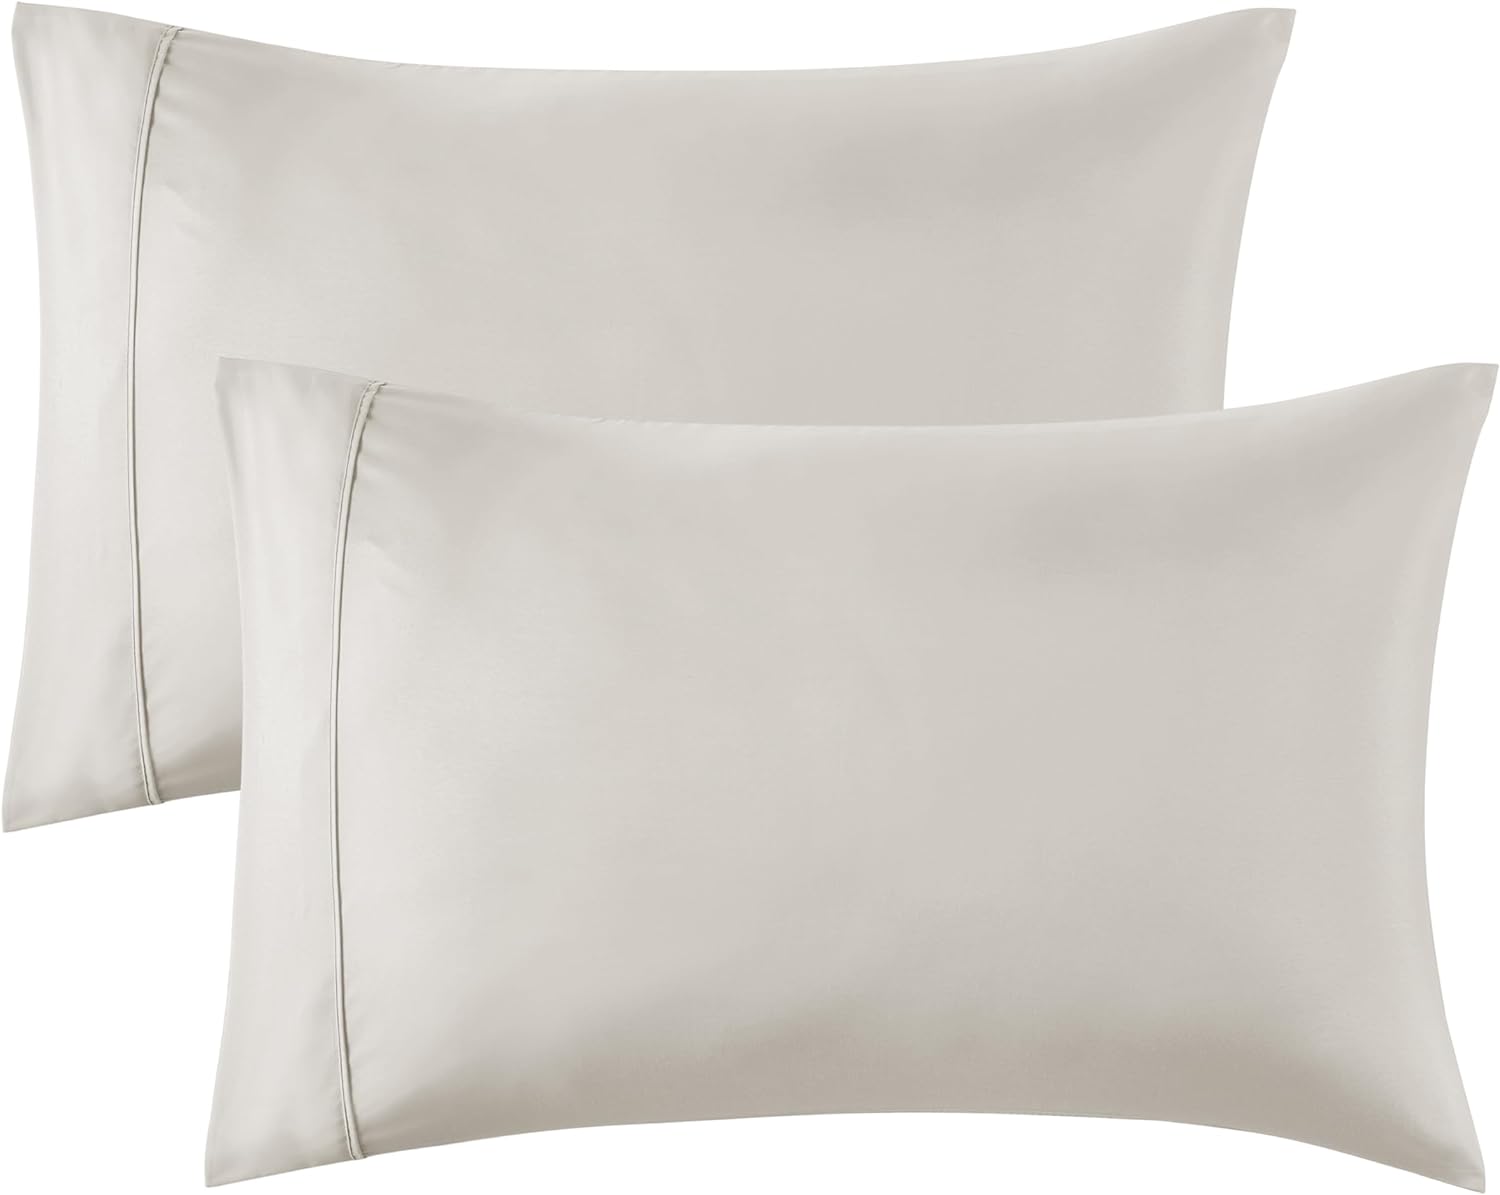 Bedsure Queen Pillow Cases Set of 2 - Linen Polyester Microfiber Pillowcase 2 Pack, Super Soft and Cozy Pillow Case Covers with Envelop Closure, 20x30 Inches